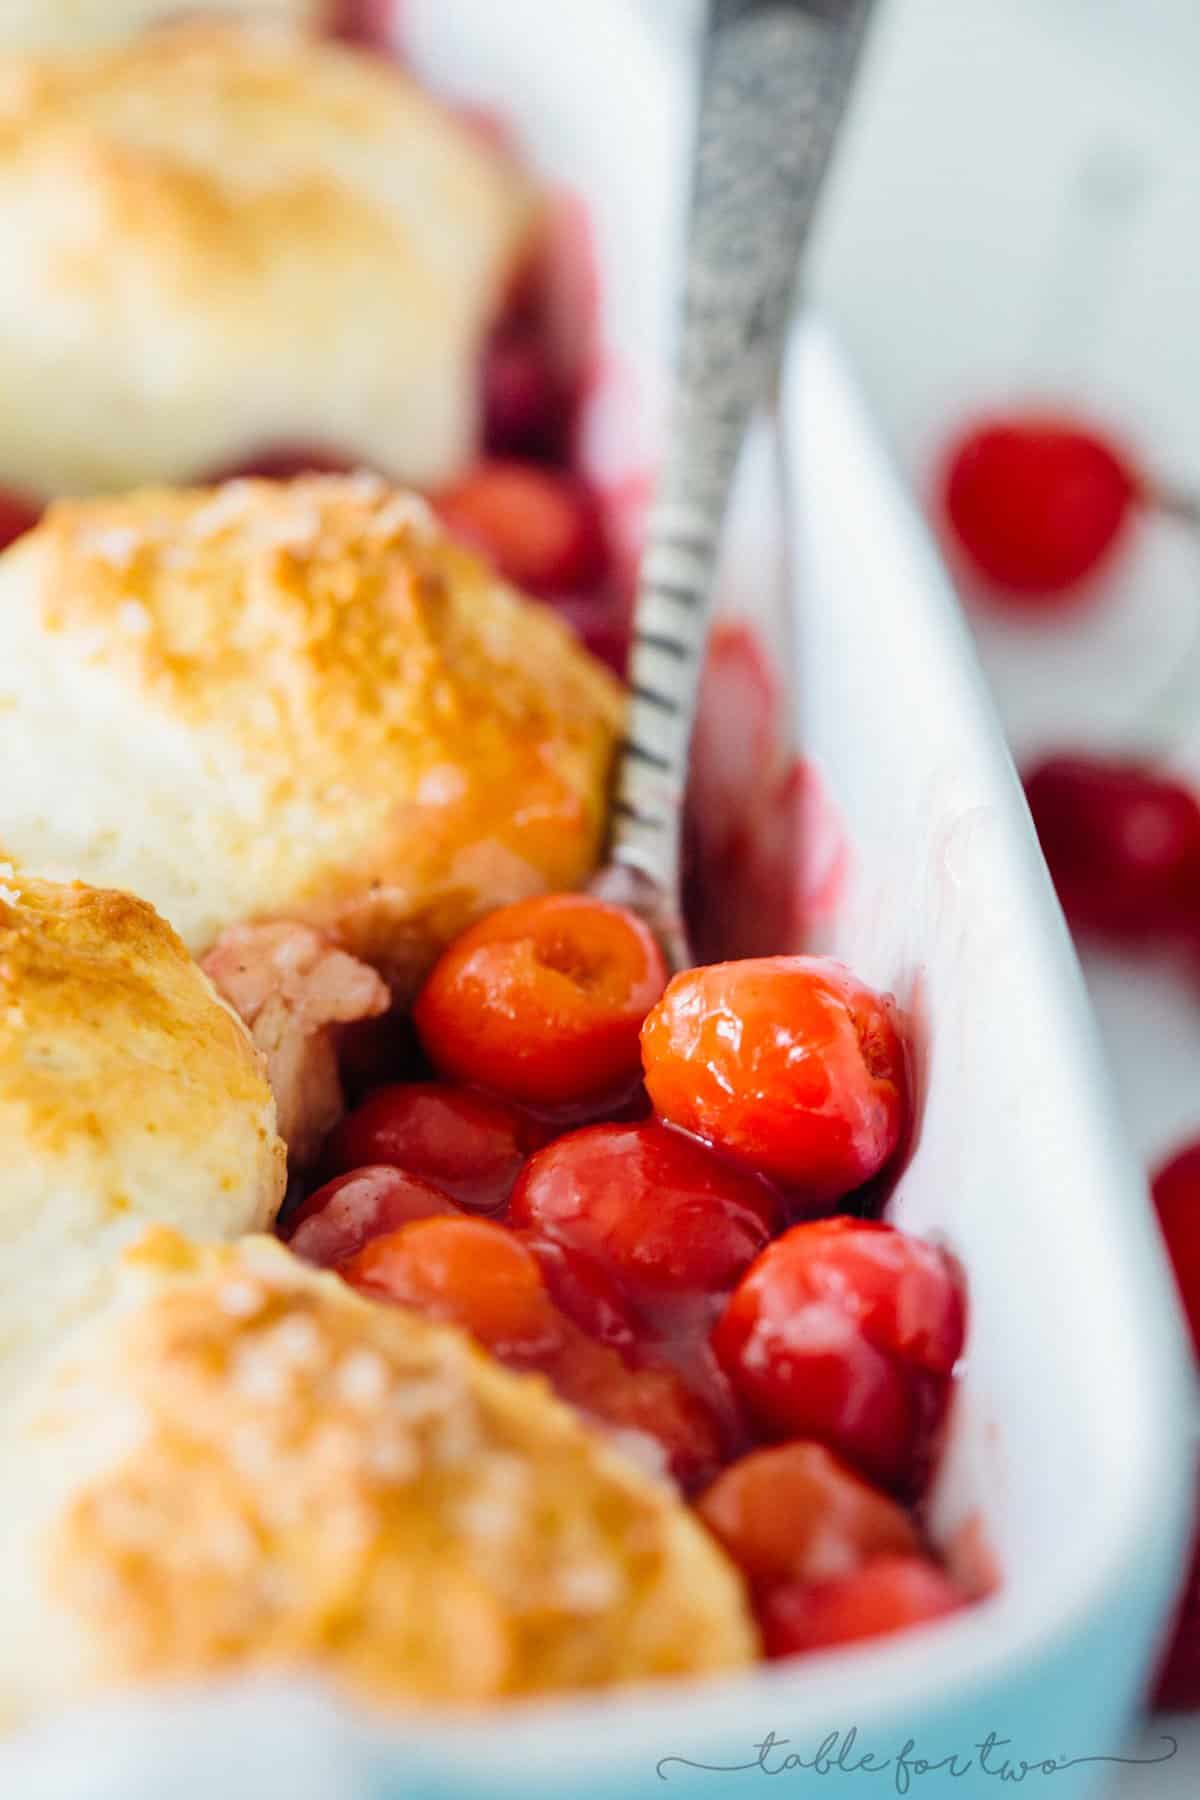 It could not be easier to make a classic sour cherry cobbler right in your own home. Using the seasonal and fresh cherries, this classic sour cherry cobbler comes together quickly and easily! Use any seasonal fruit in this recipe and top with a giant scoop of ice cream for the ultimate dessert!